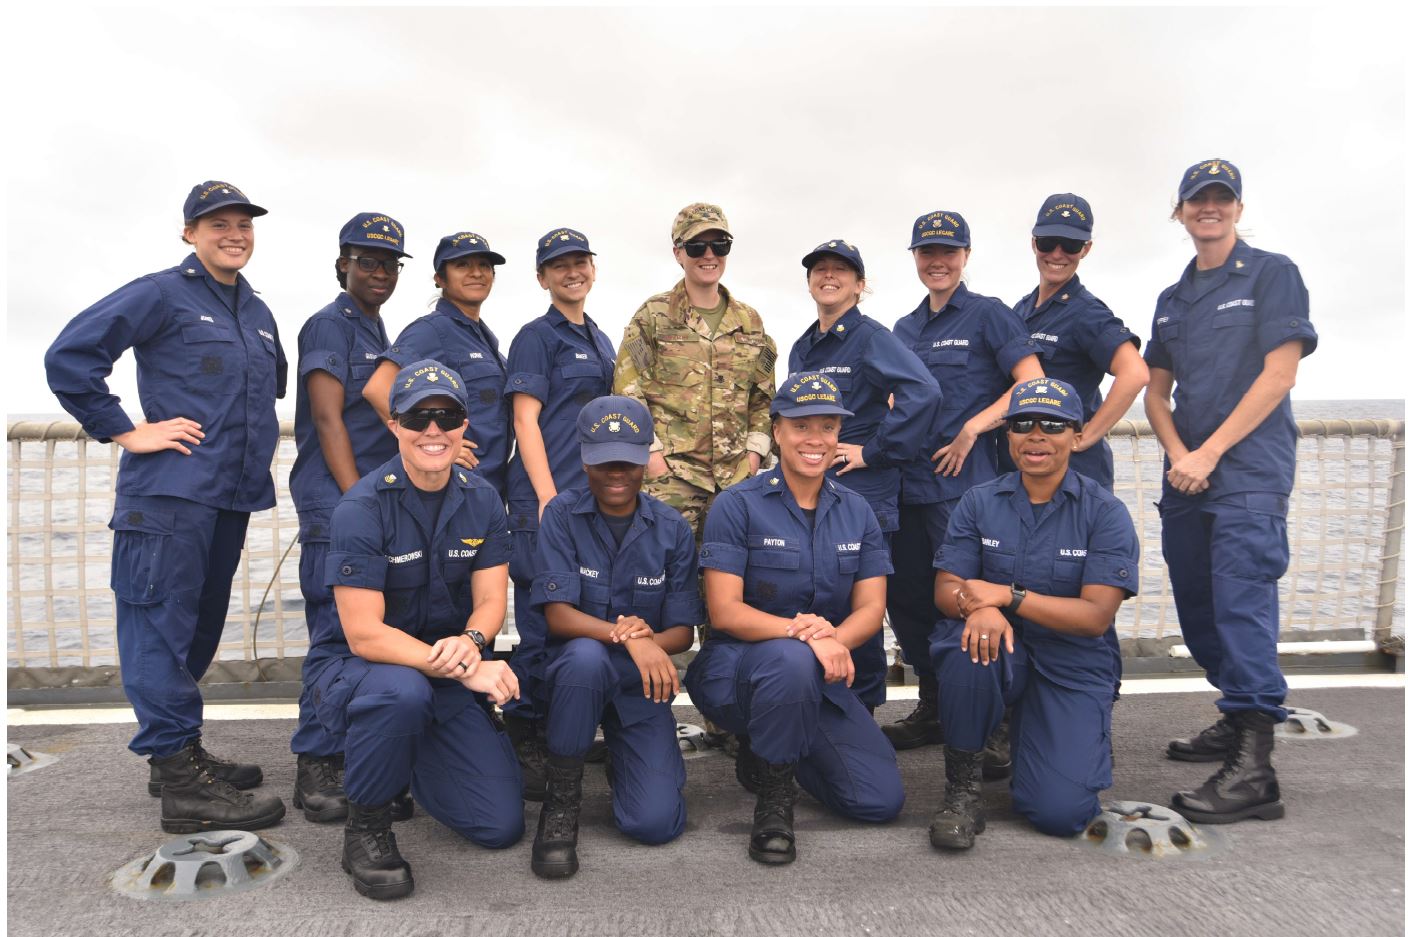 Participants from CGC Legare's first Women's Focus Group. Photo by EM3 Hammack